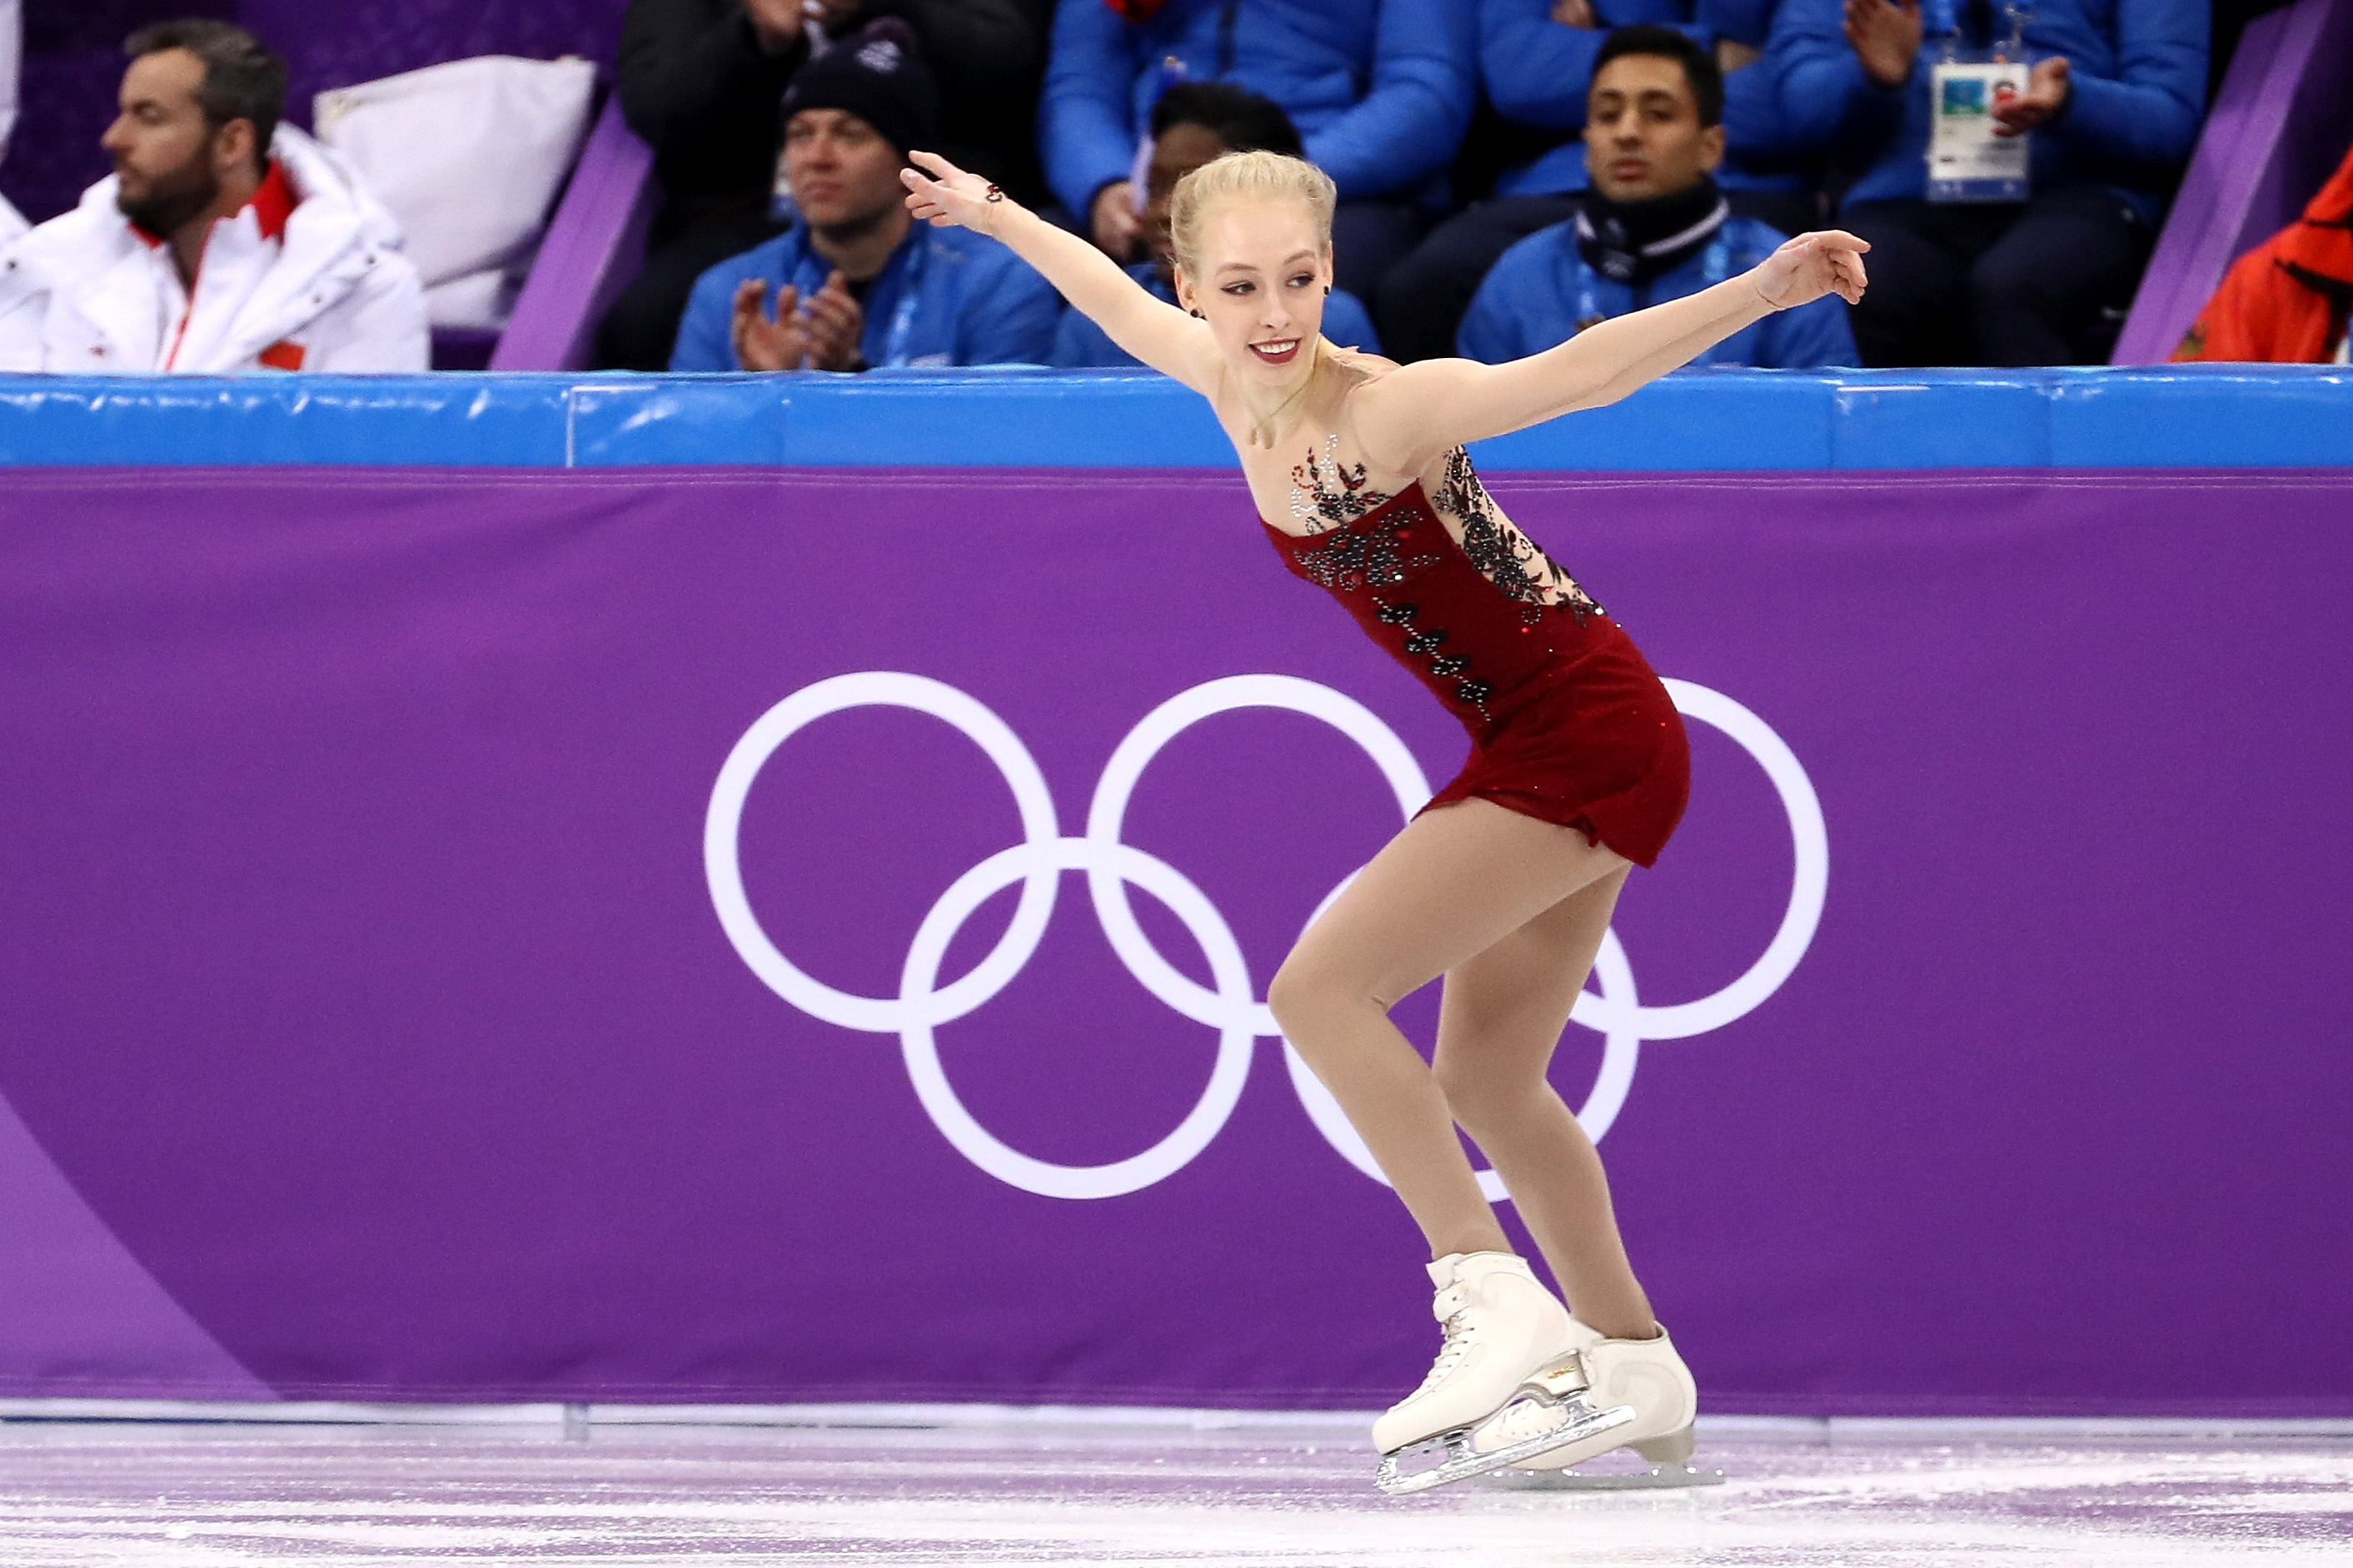 Bradie Tennell of the United States competes in the Figure Skating Team Event  Ladies Short Program on day two of the PyeongChang 2018 Winter Olympic Games at Gangneung Ice Arena on February 11, 2018 in Gangneung, South Korea. (Jamie Squire—Getty Images)